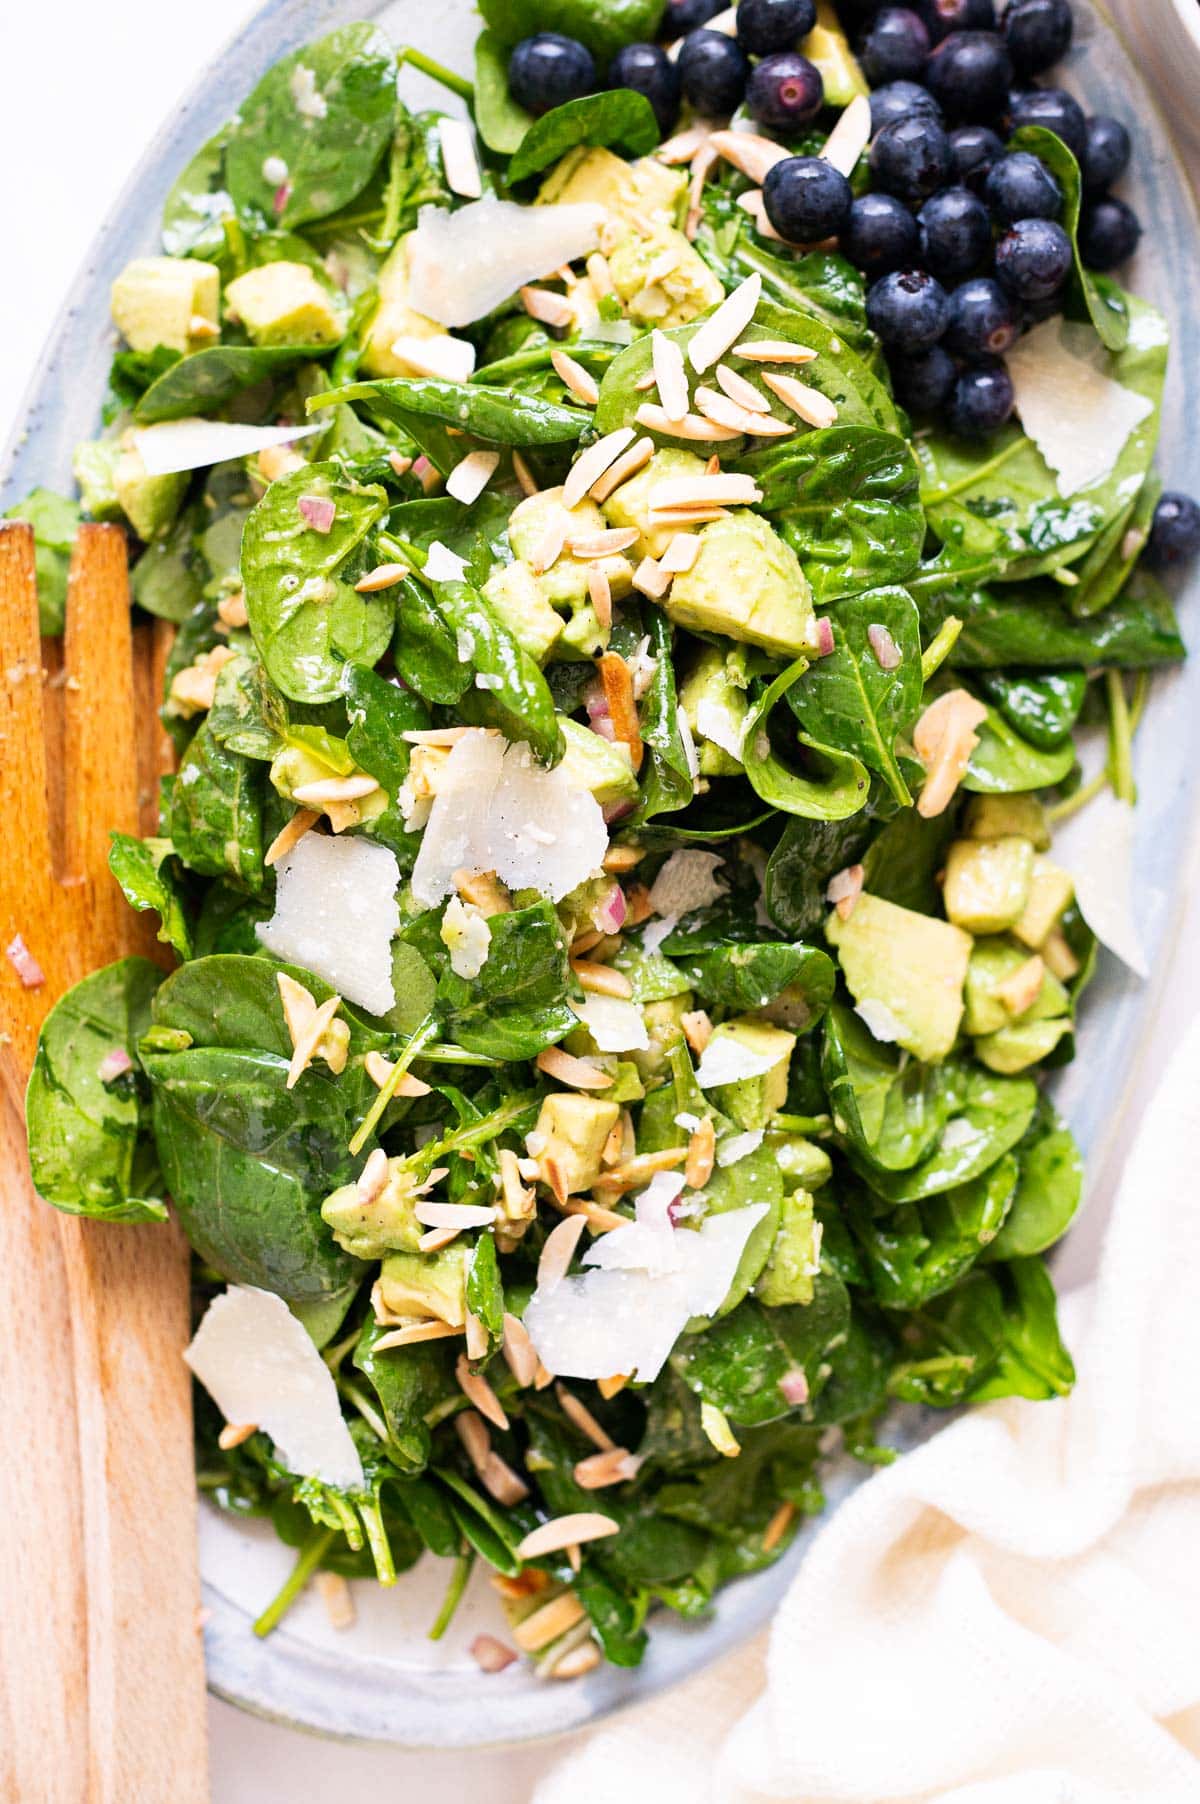 Spinach avocado salad with almonds, parmesan cheese and blueberries.